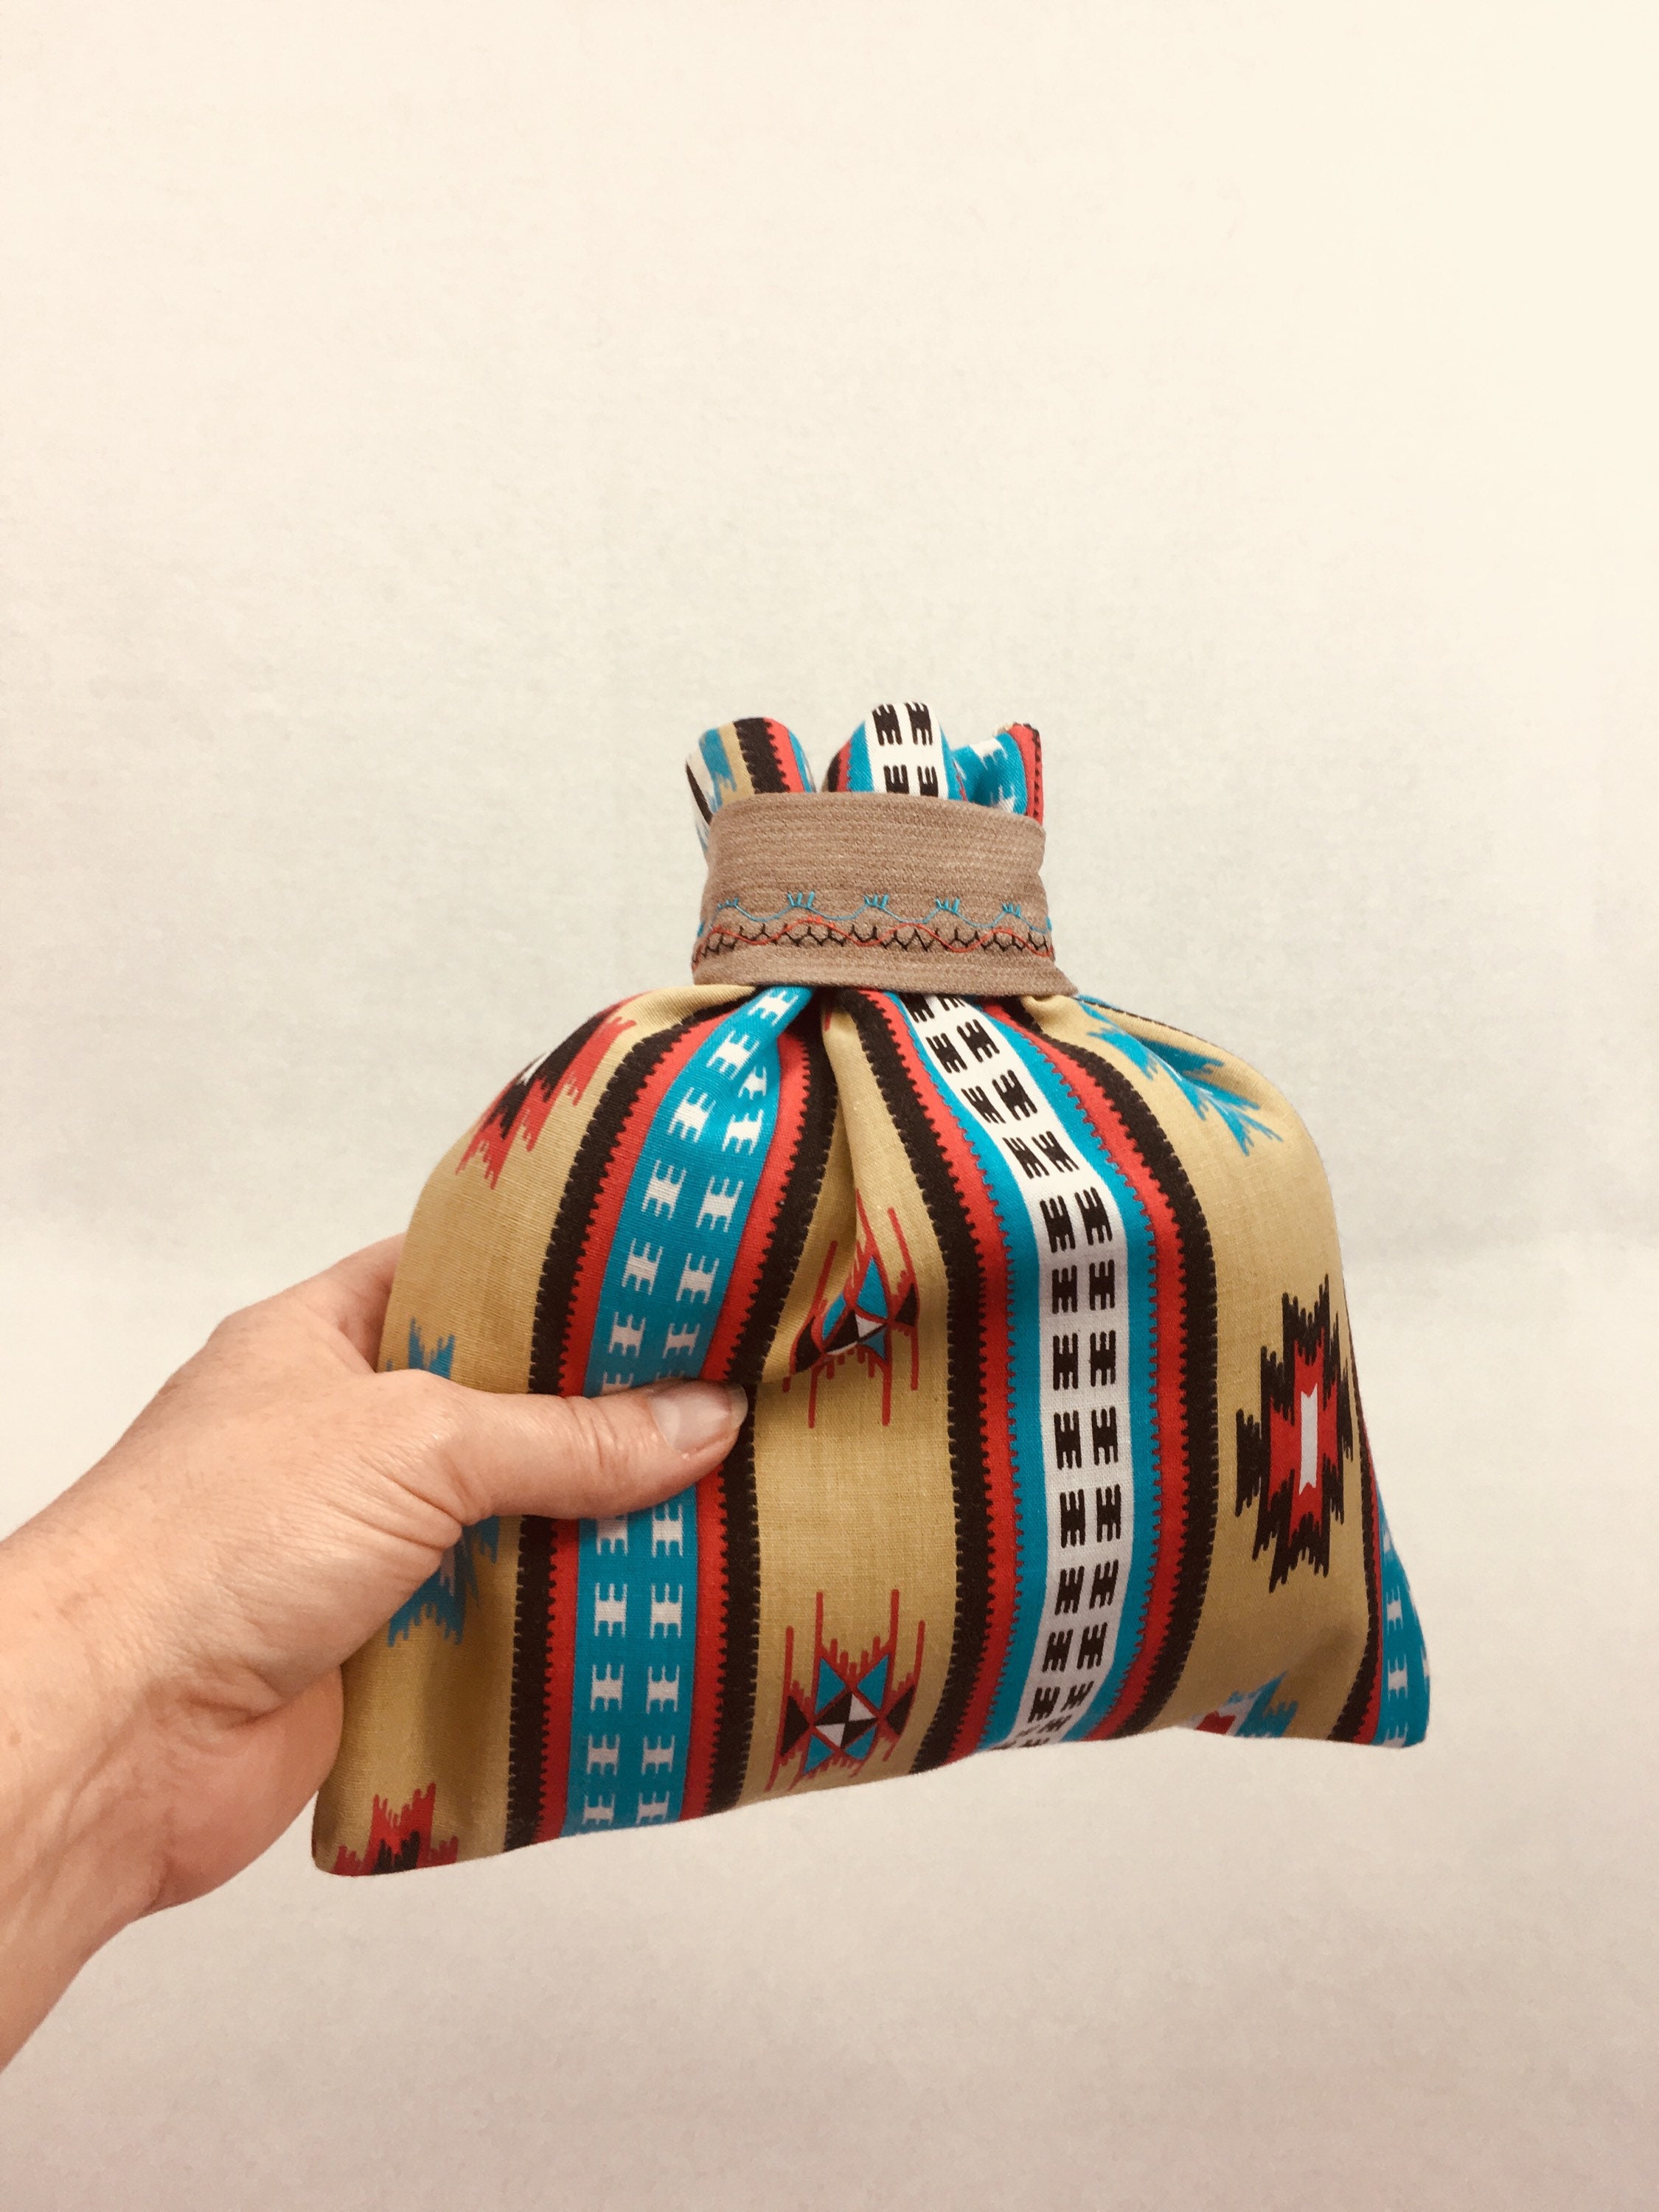 Southwestern Style Gift Bag, Father's Day Gift, Upcycled, Native